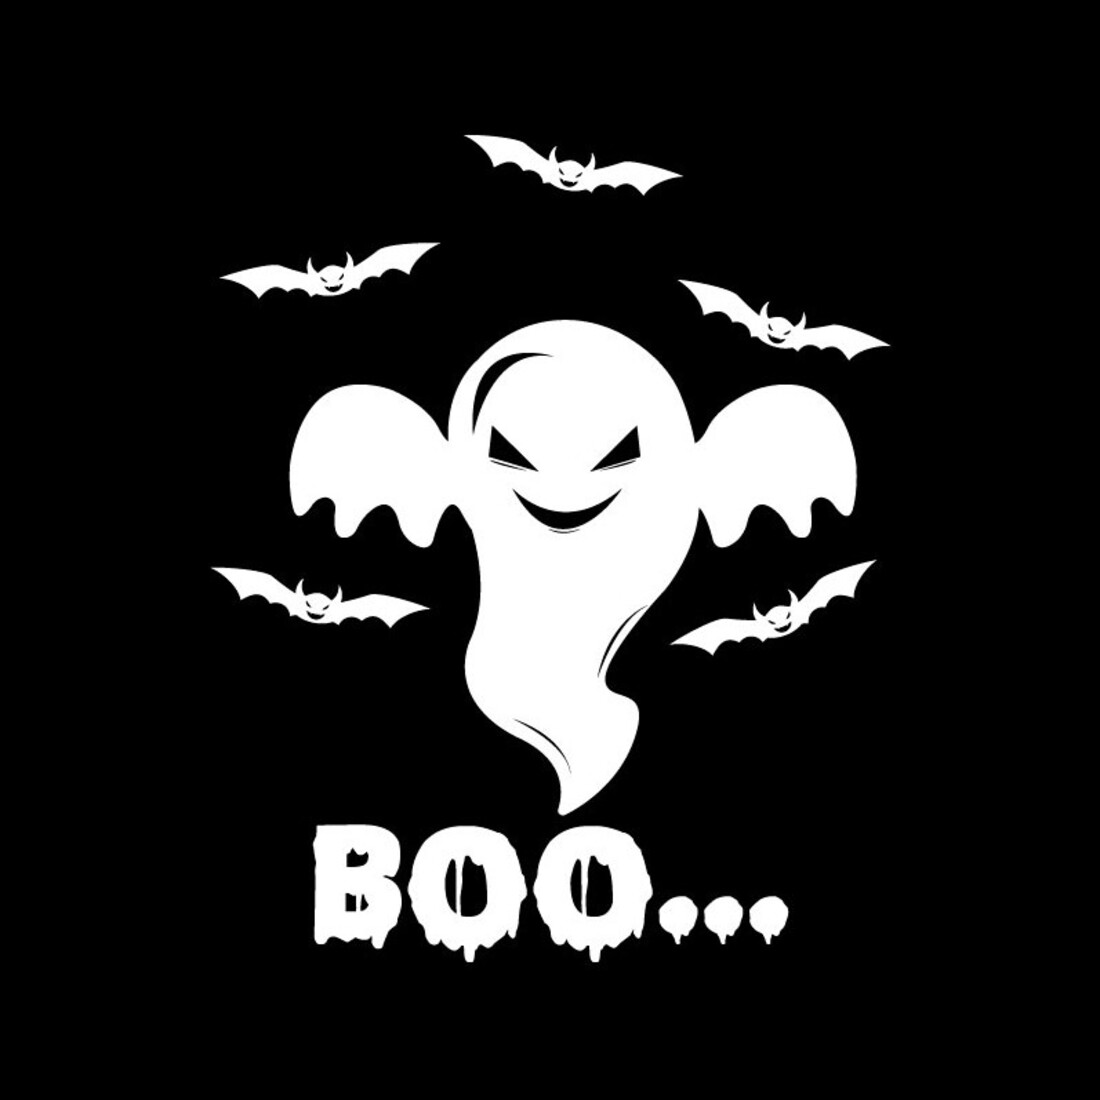 Halloween Black and White T-shirt Graphics cover image.